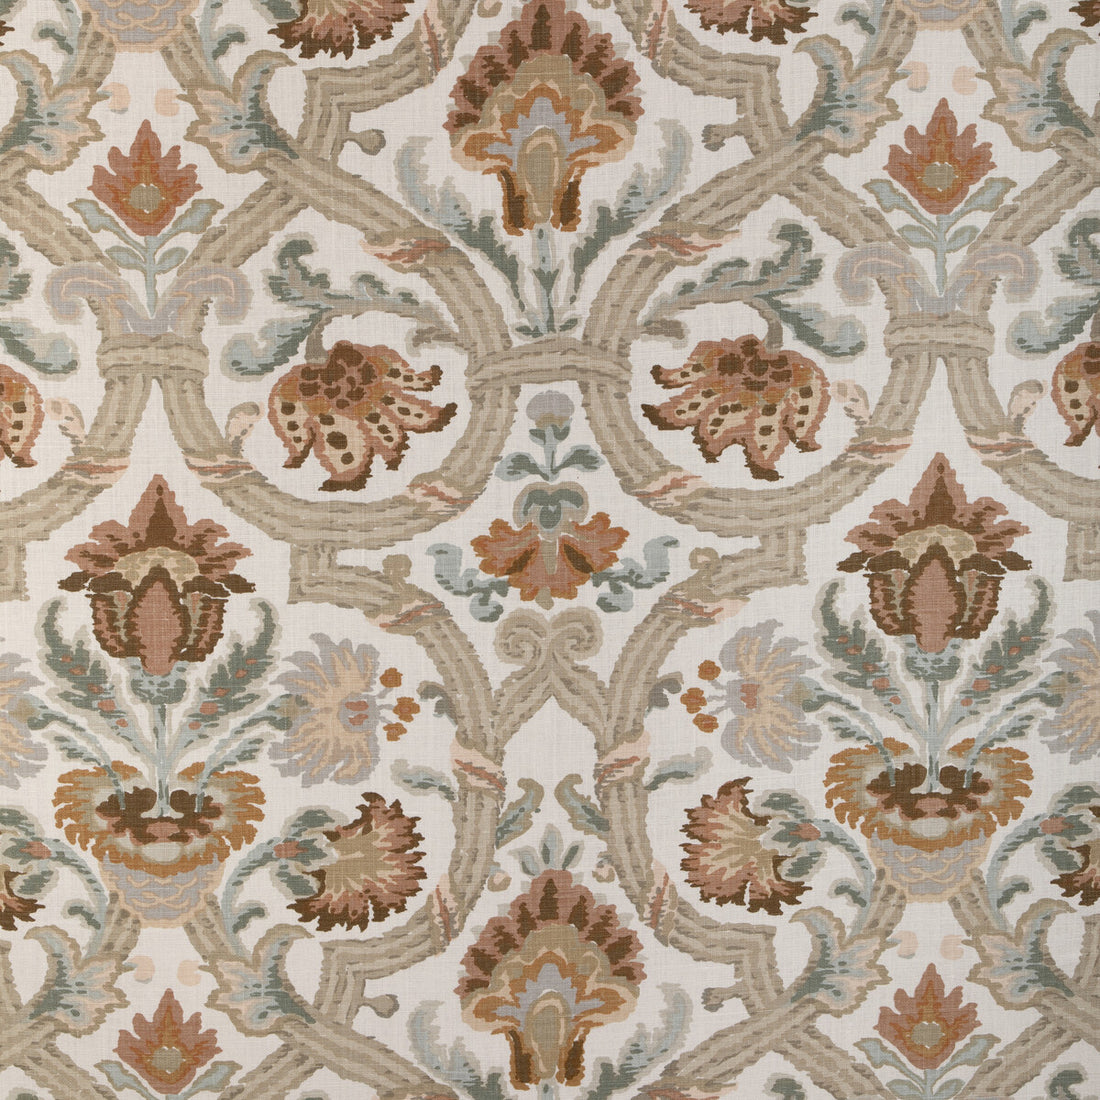 New Sevilla Linen fabric in clay color - pattern 2023118.1211.0 - by Lee Jofa in the Lee Jofa 200 collection